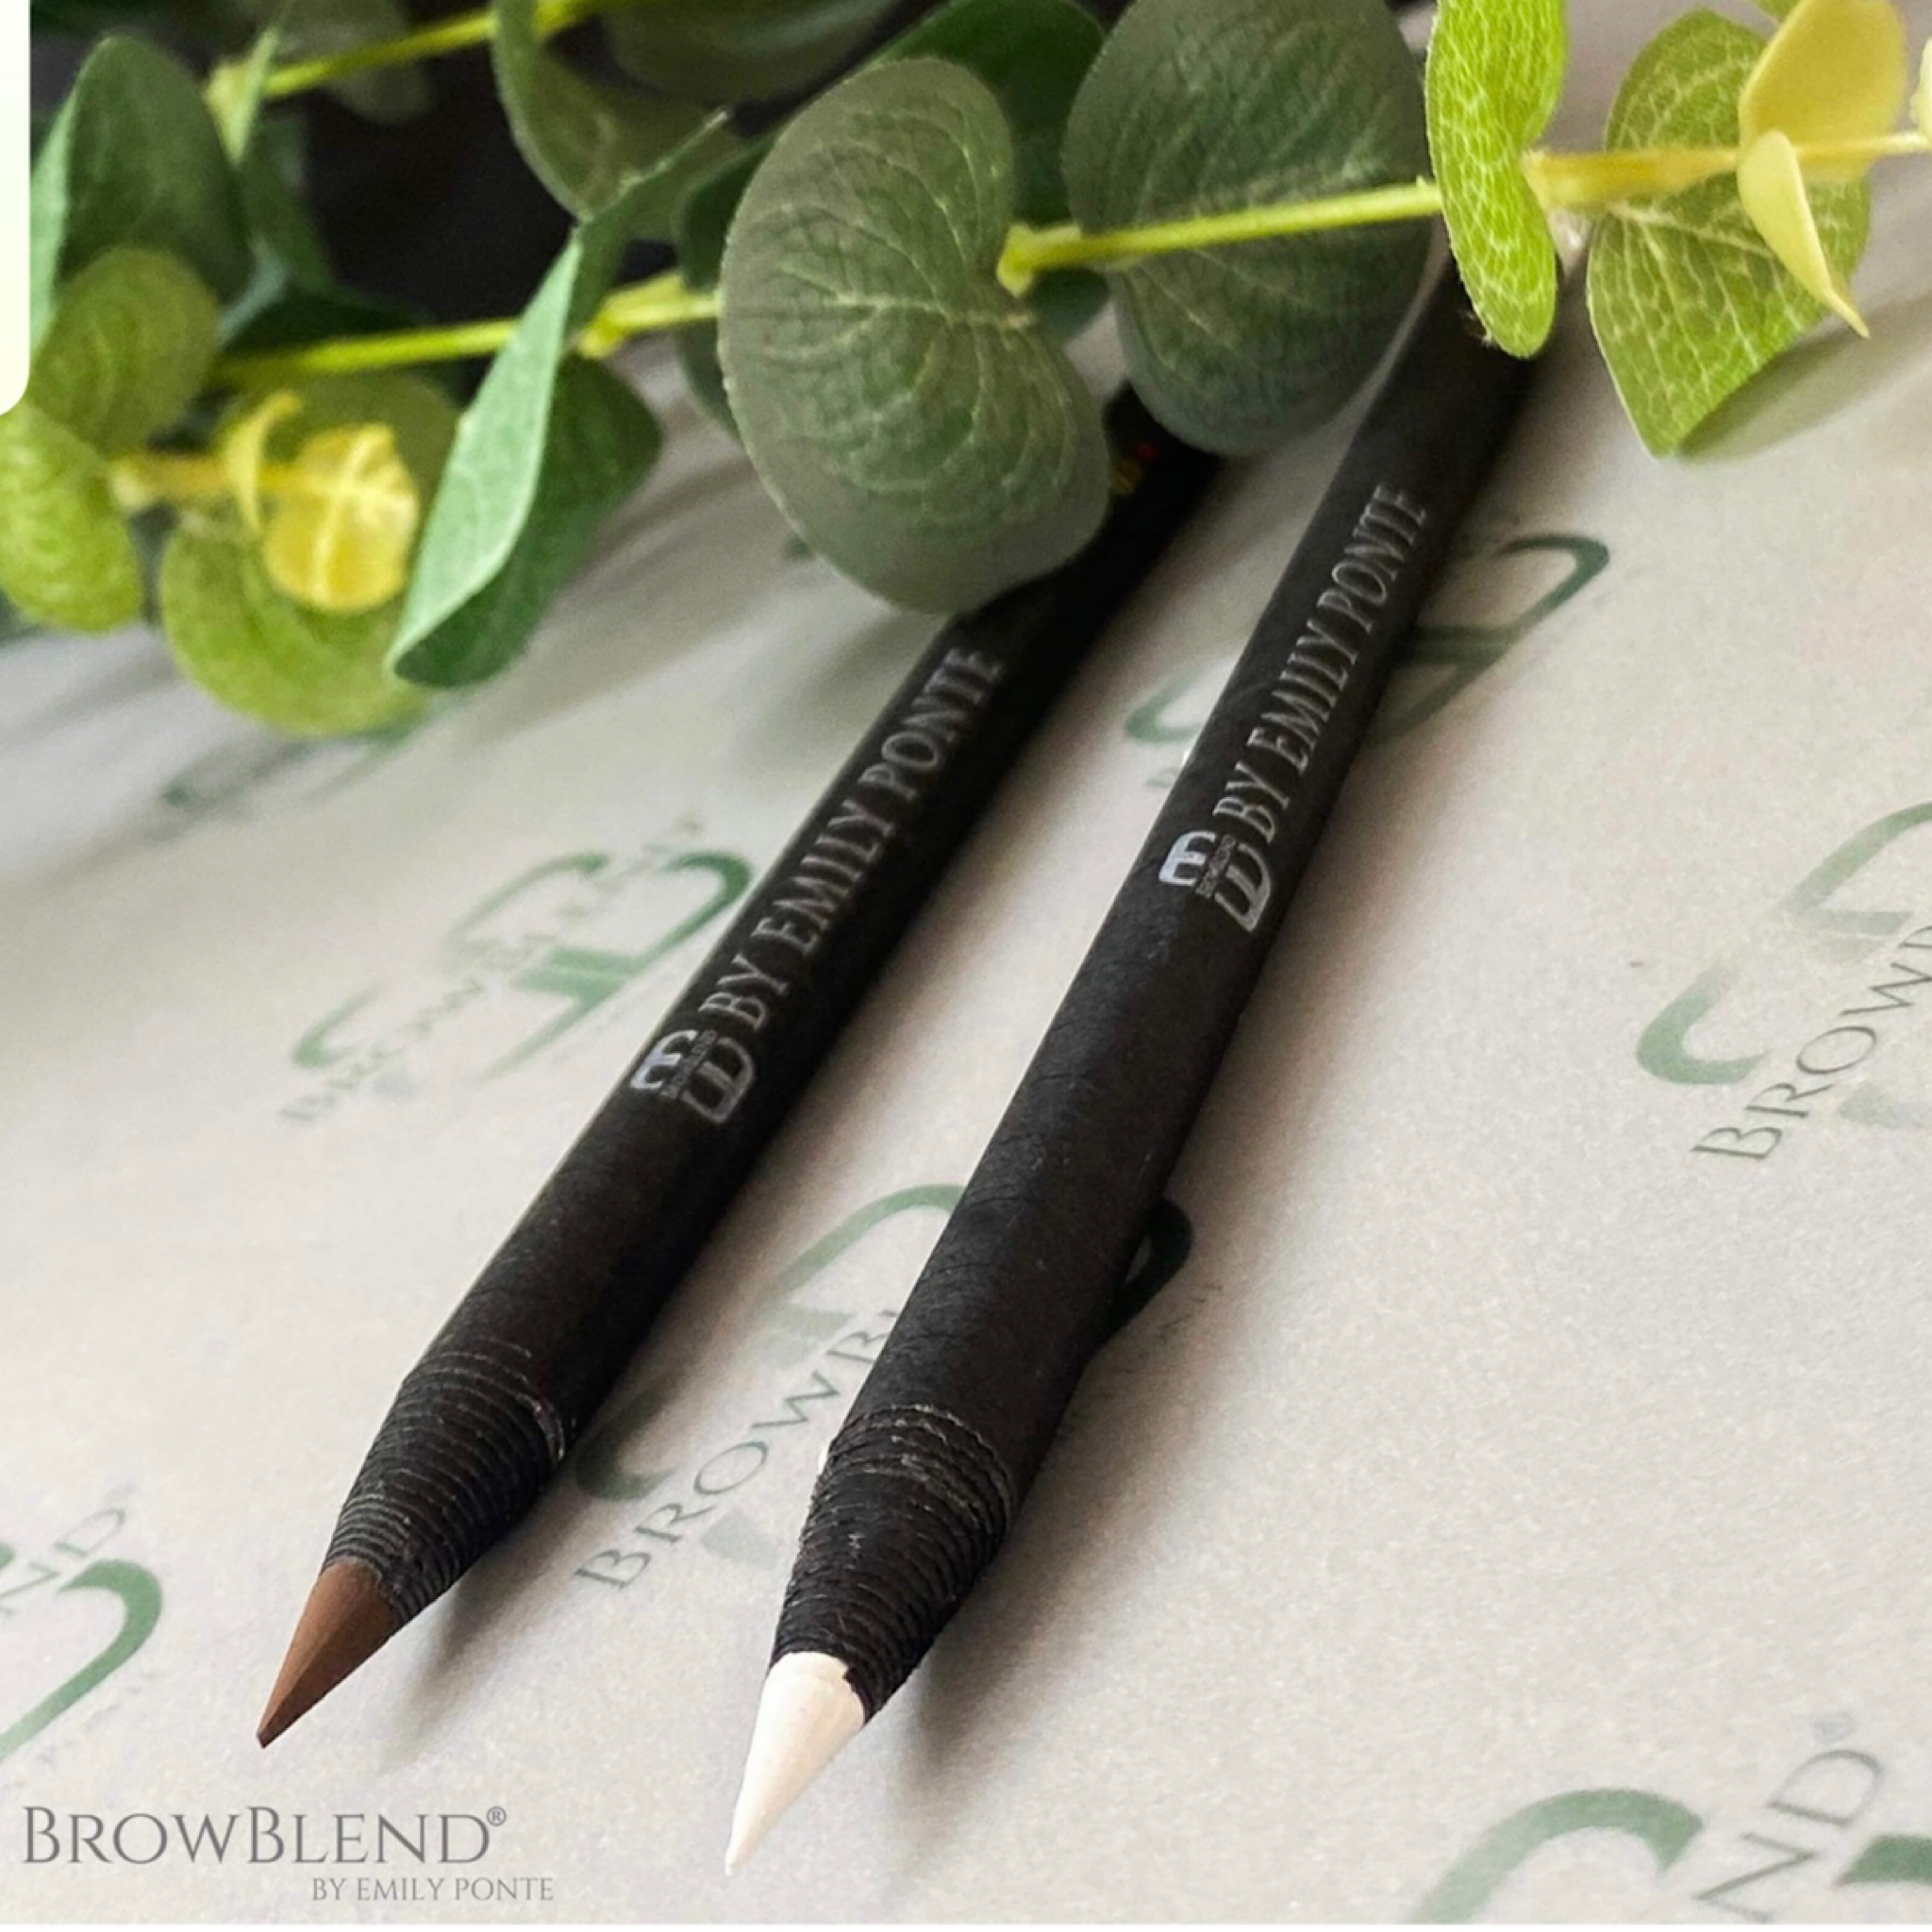 Brow Mapping Wax Pencils, White or Black – Universal Companies